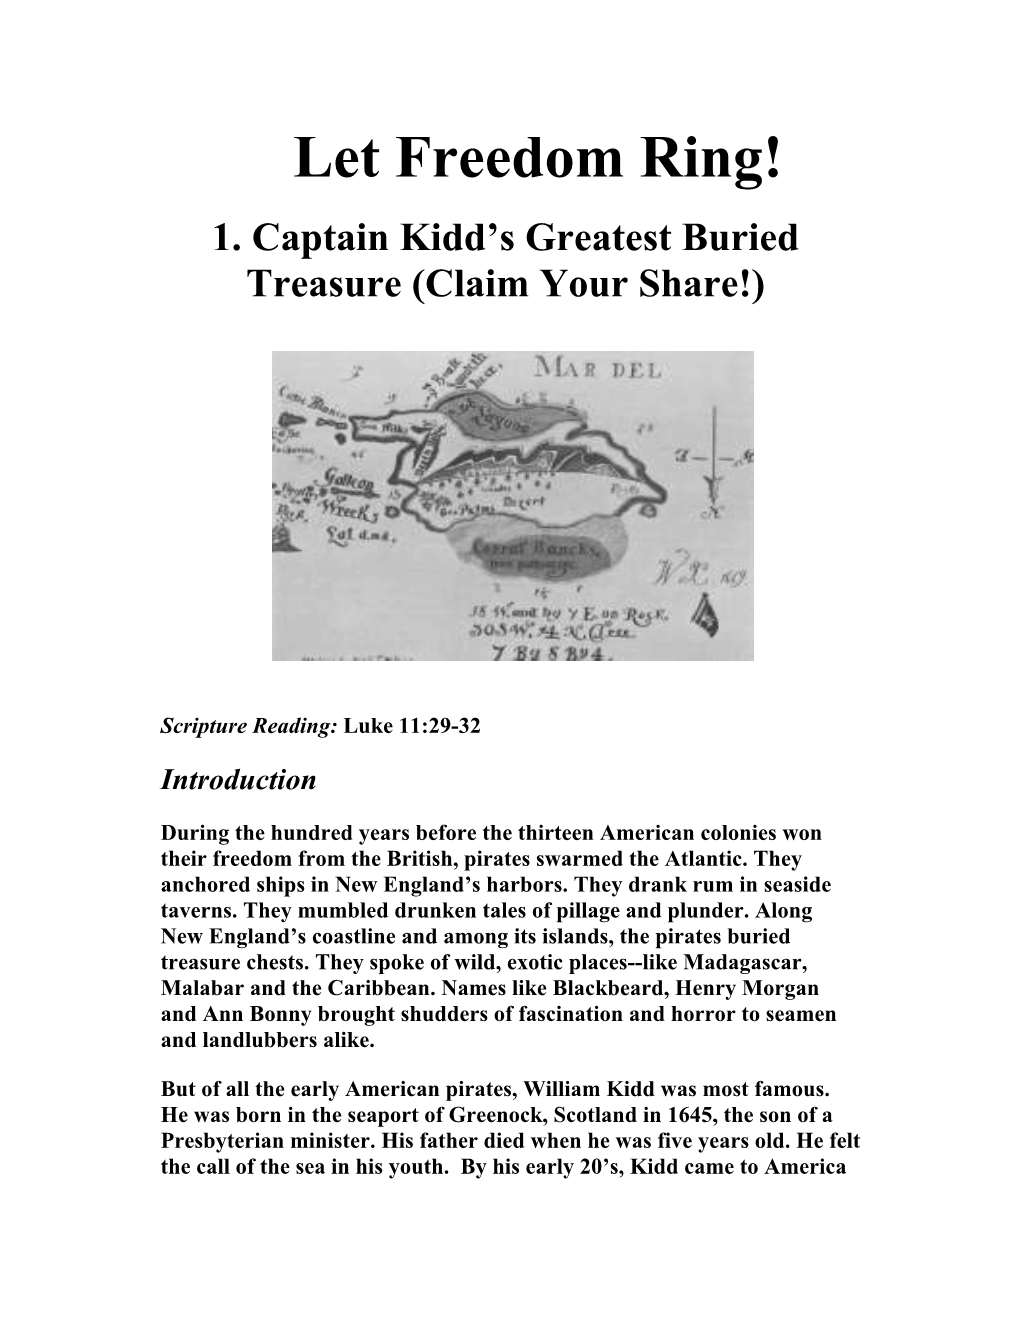 Let Freedom Ring 1. Captain Kidd's Greatest Buried Treasure